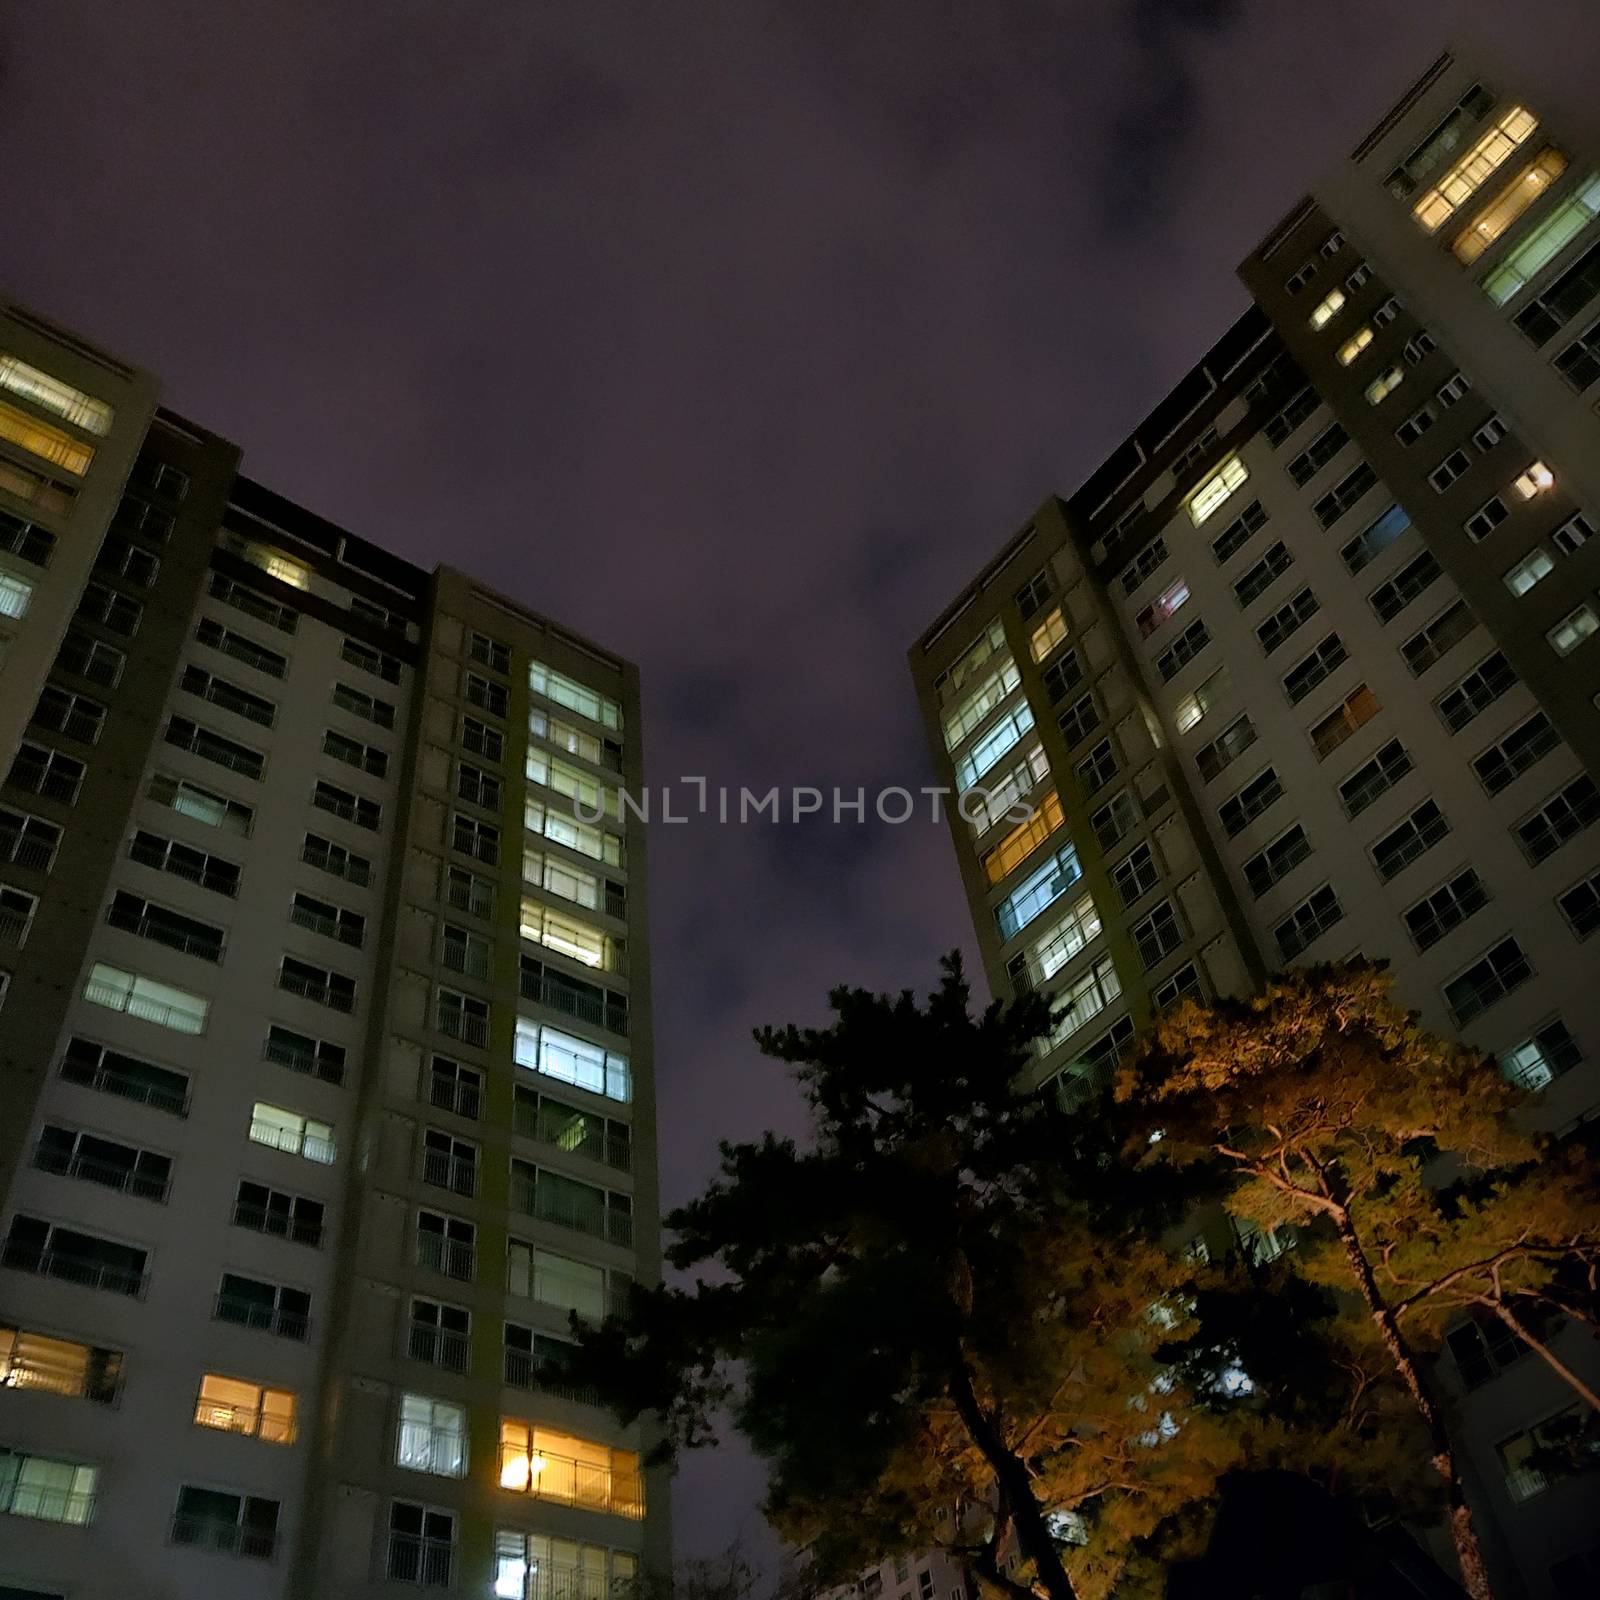 Low angle of residential building at night by mshivangi92